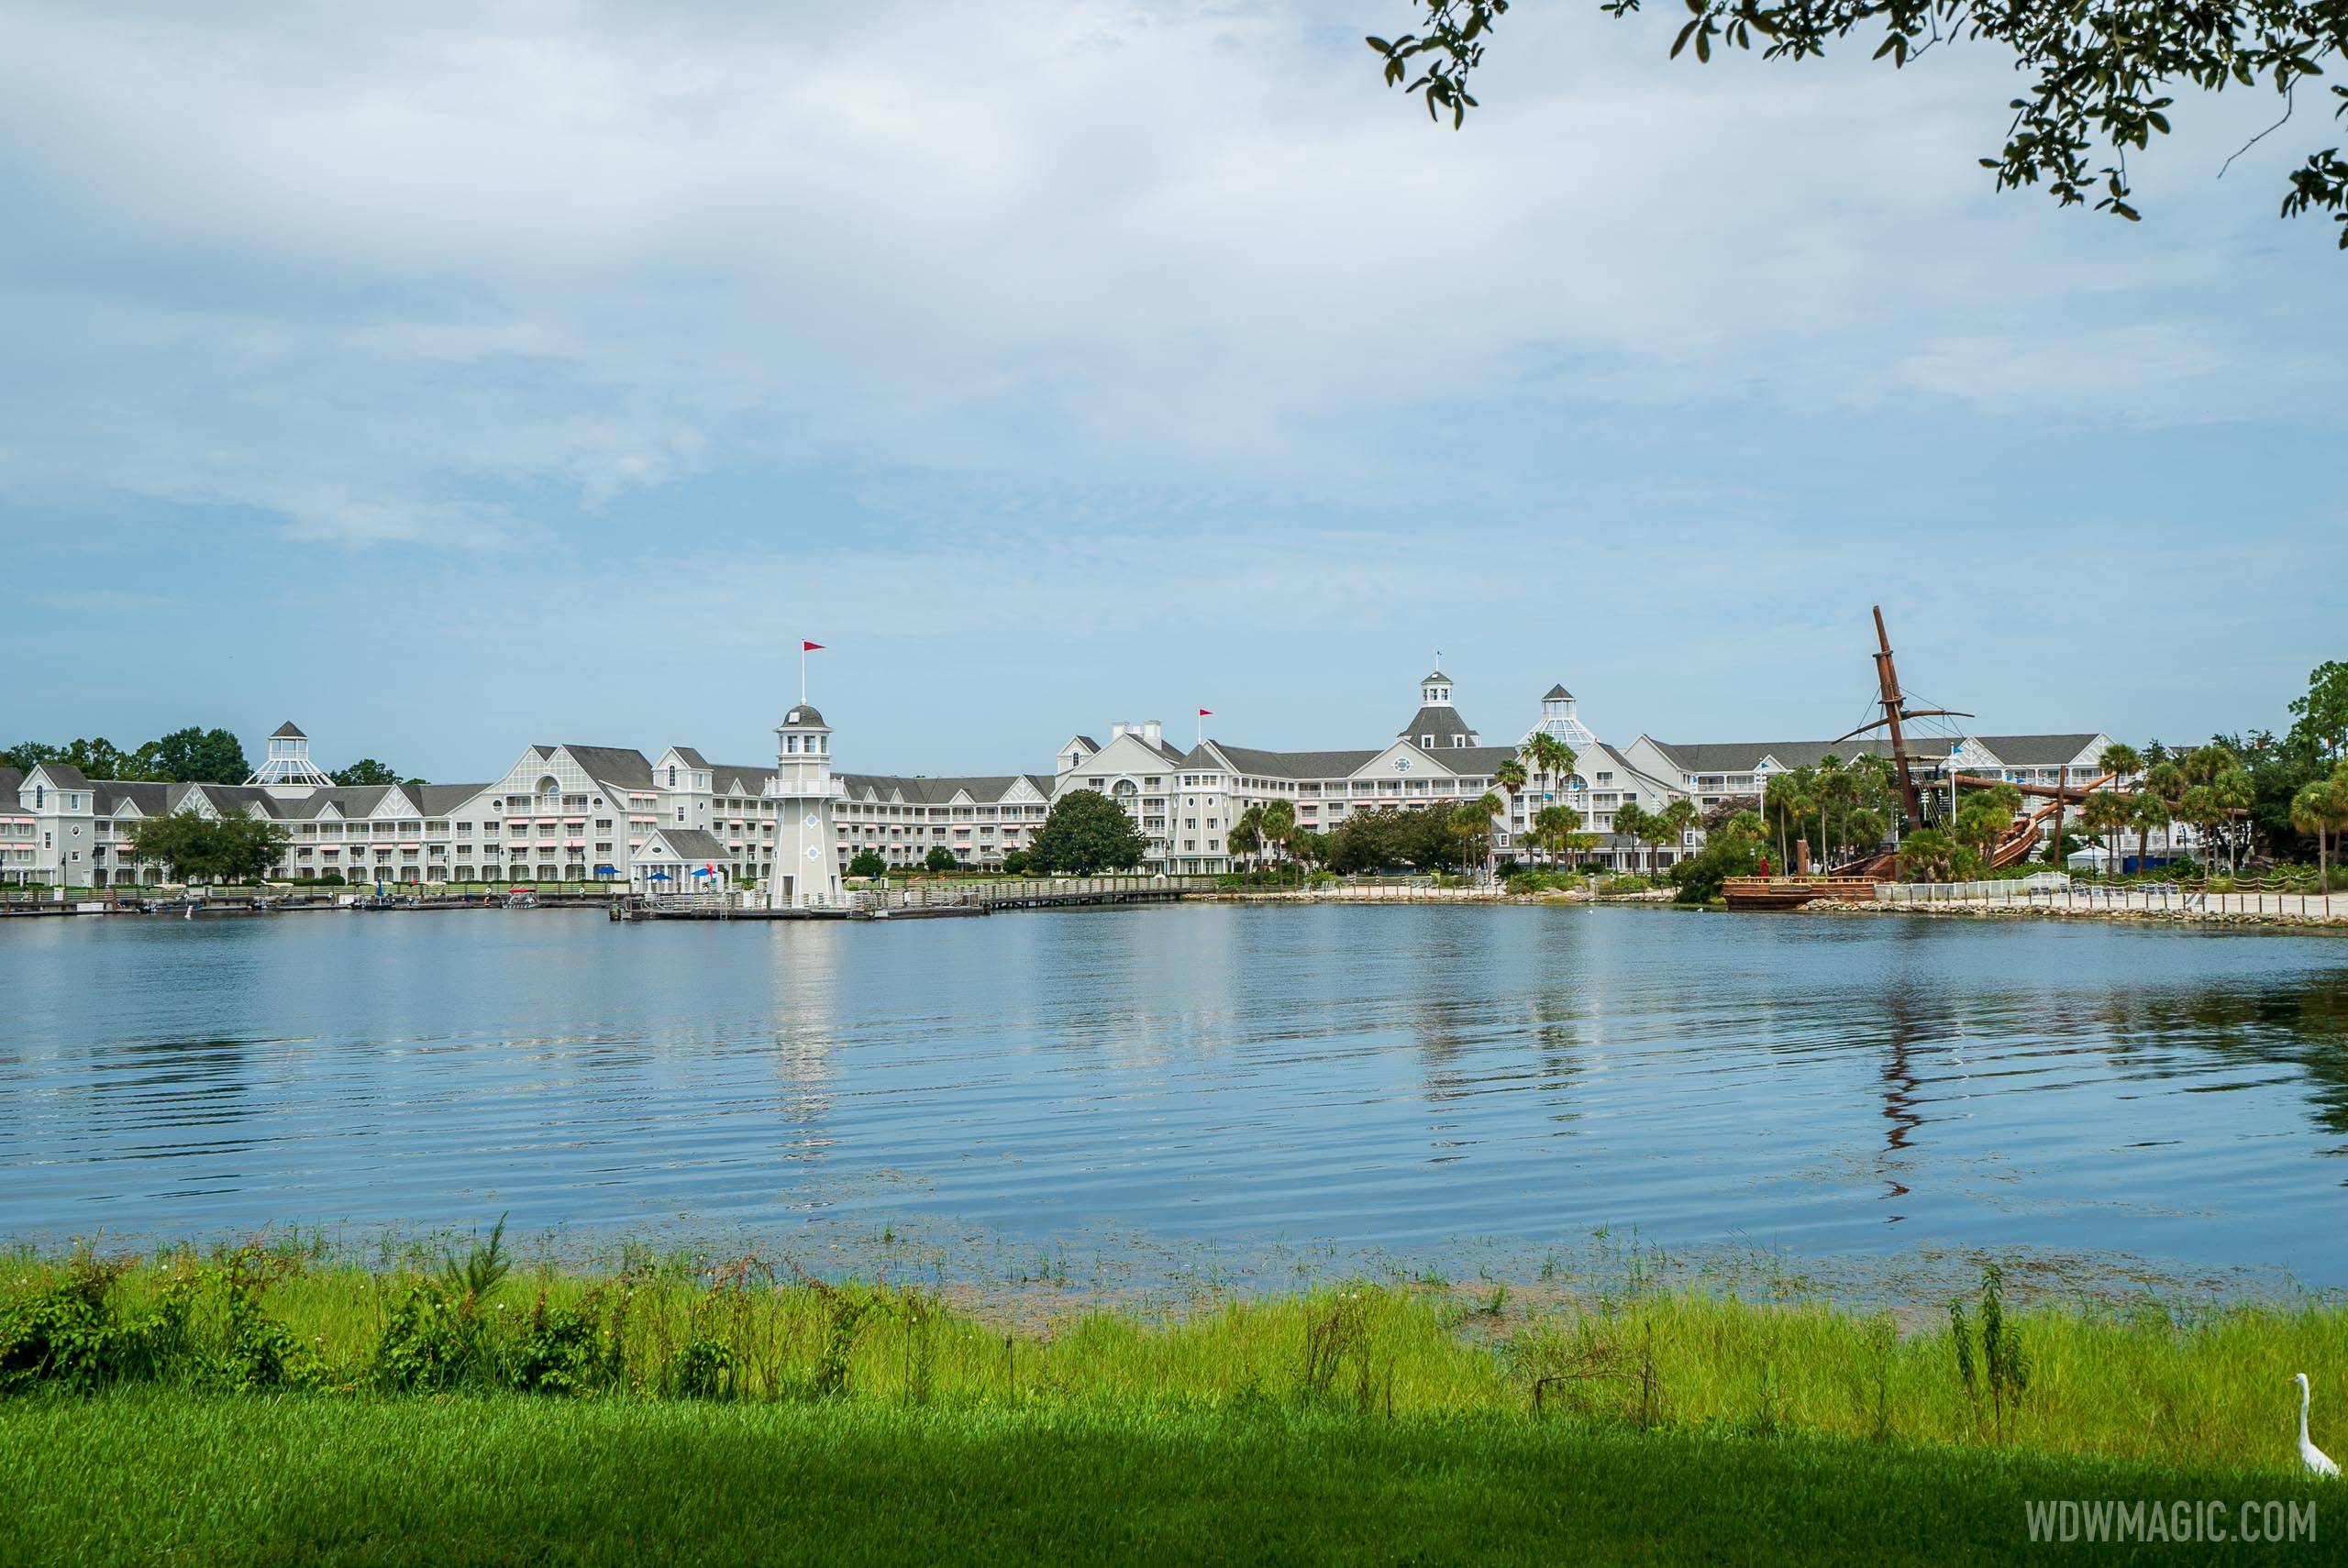 Disney's Yacht Club Resort to expand its convention center